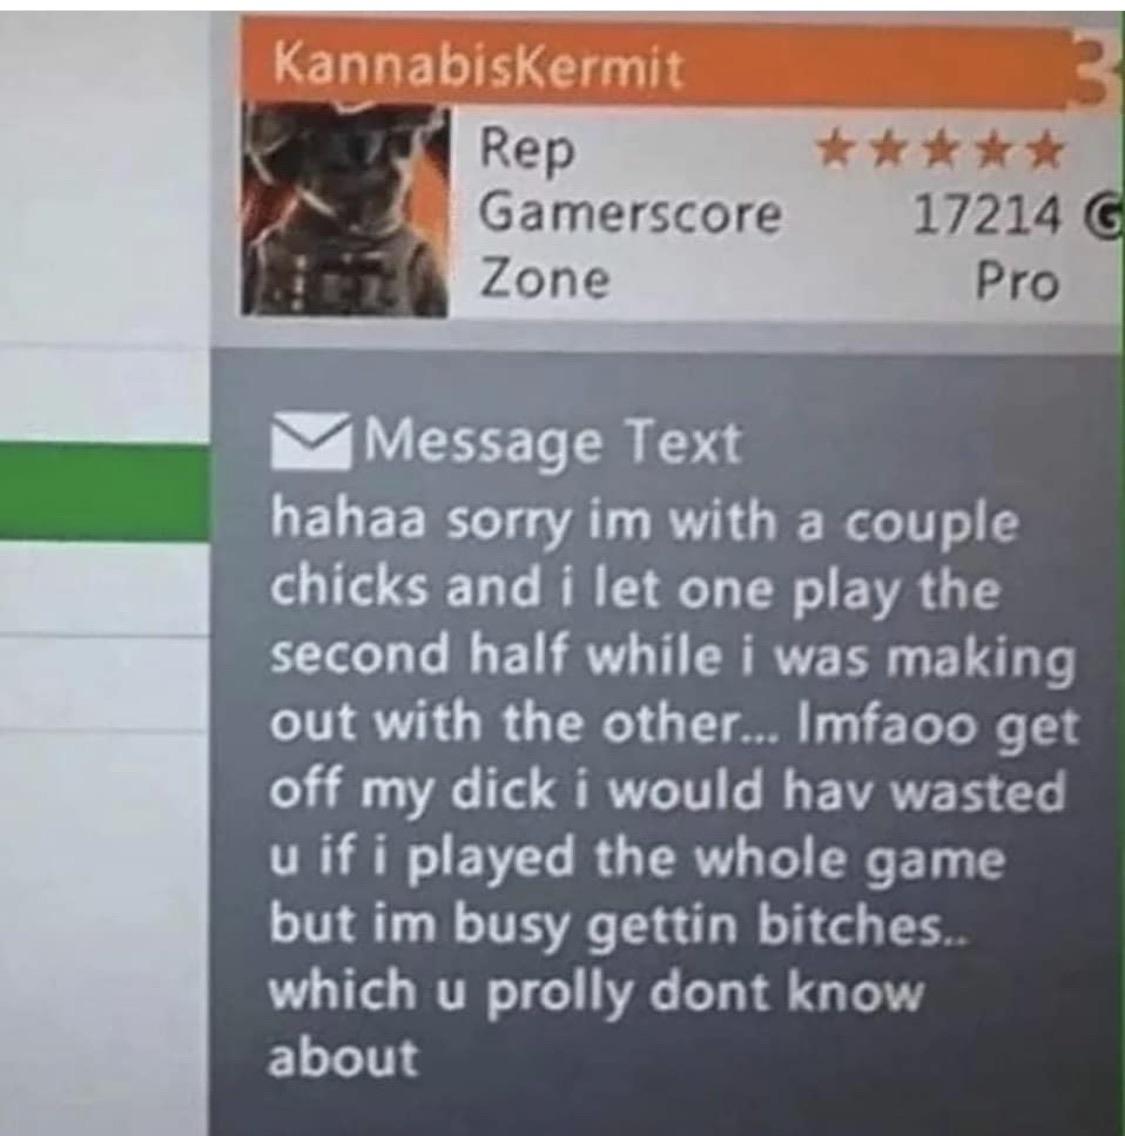 software - Kannabiskermit Rep Gamerscore Zone 17214 G Pro Message Text hahaa sorry im with a couple chicks and i let one play the second half while i was making out with the other... Imfaoo get off my dick i would hav wasted u if i played the whole game b